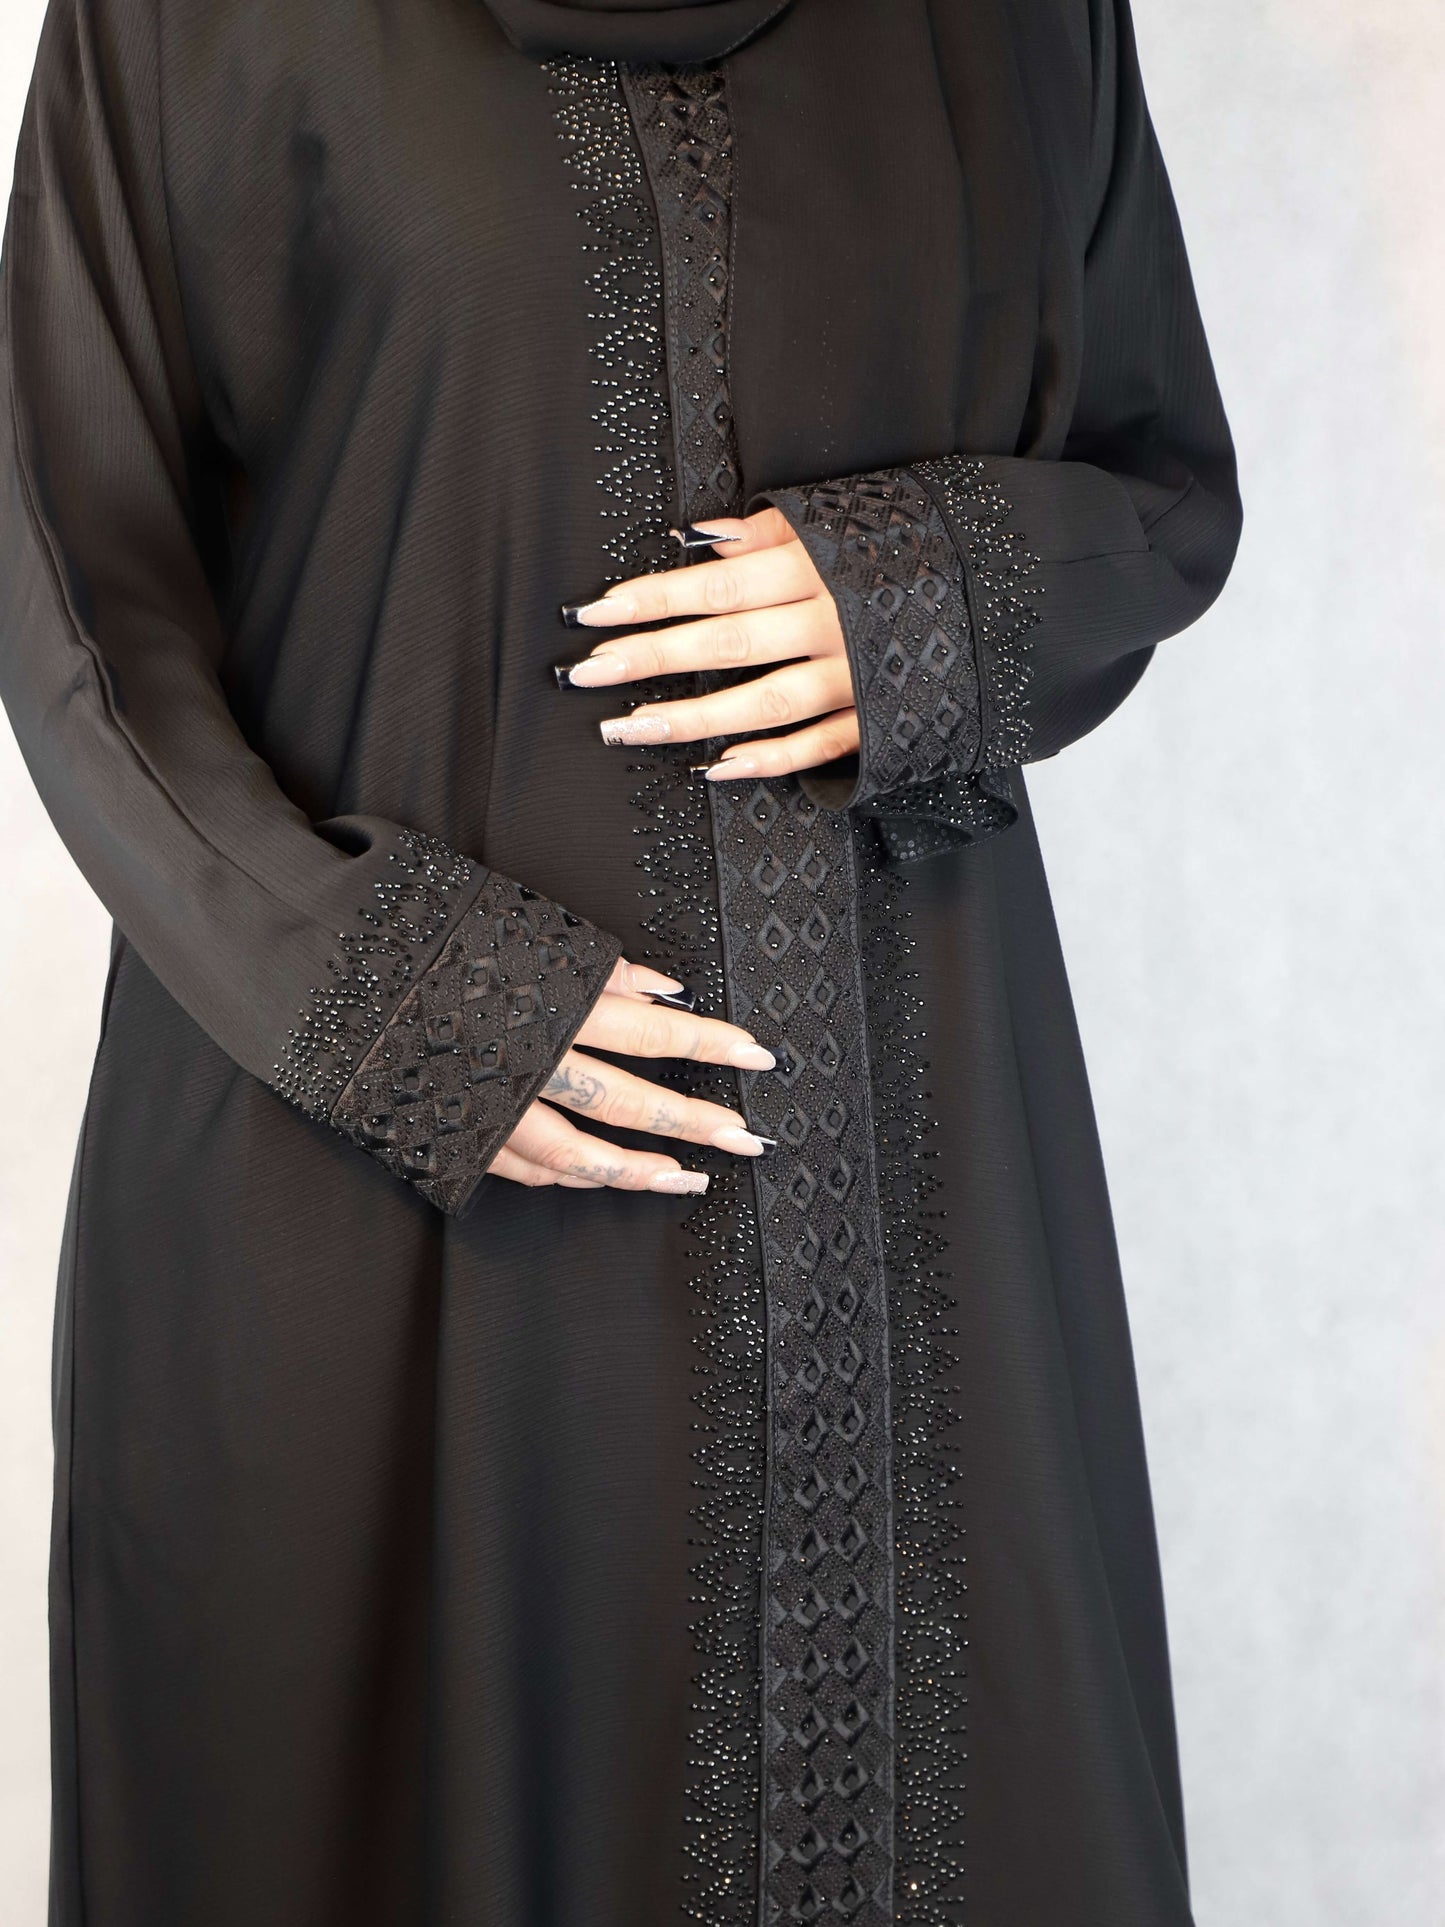 Black Abaya Full Lace With Stone Work For Women Abaya,womens abayas womens abayas designer abayas uk designer abayas uk abayas abayas abayas in london abayas online uk abayas online uk abayas bradford elegant open abayas elegant open abayas mens abayas uk mens abayas uk aab abayas open abayas open abayas wedding abayas uk wedding abayas uk abayas uk abayas uk abayas for women abayas for women open abayas black open abayas black